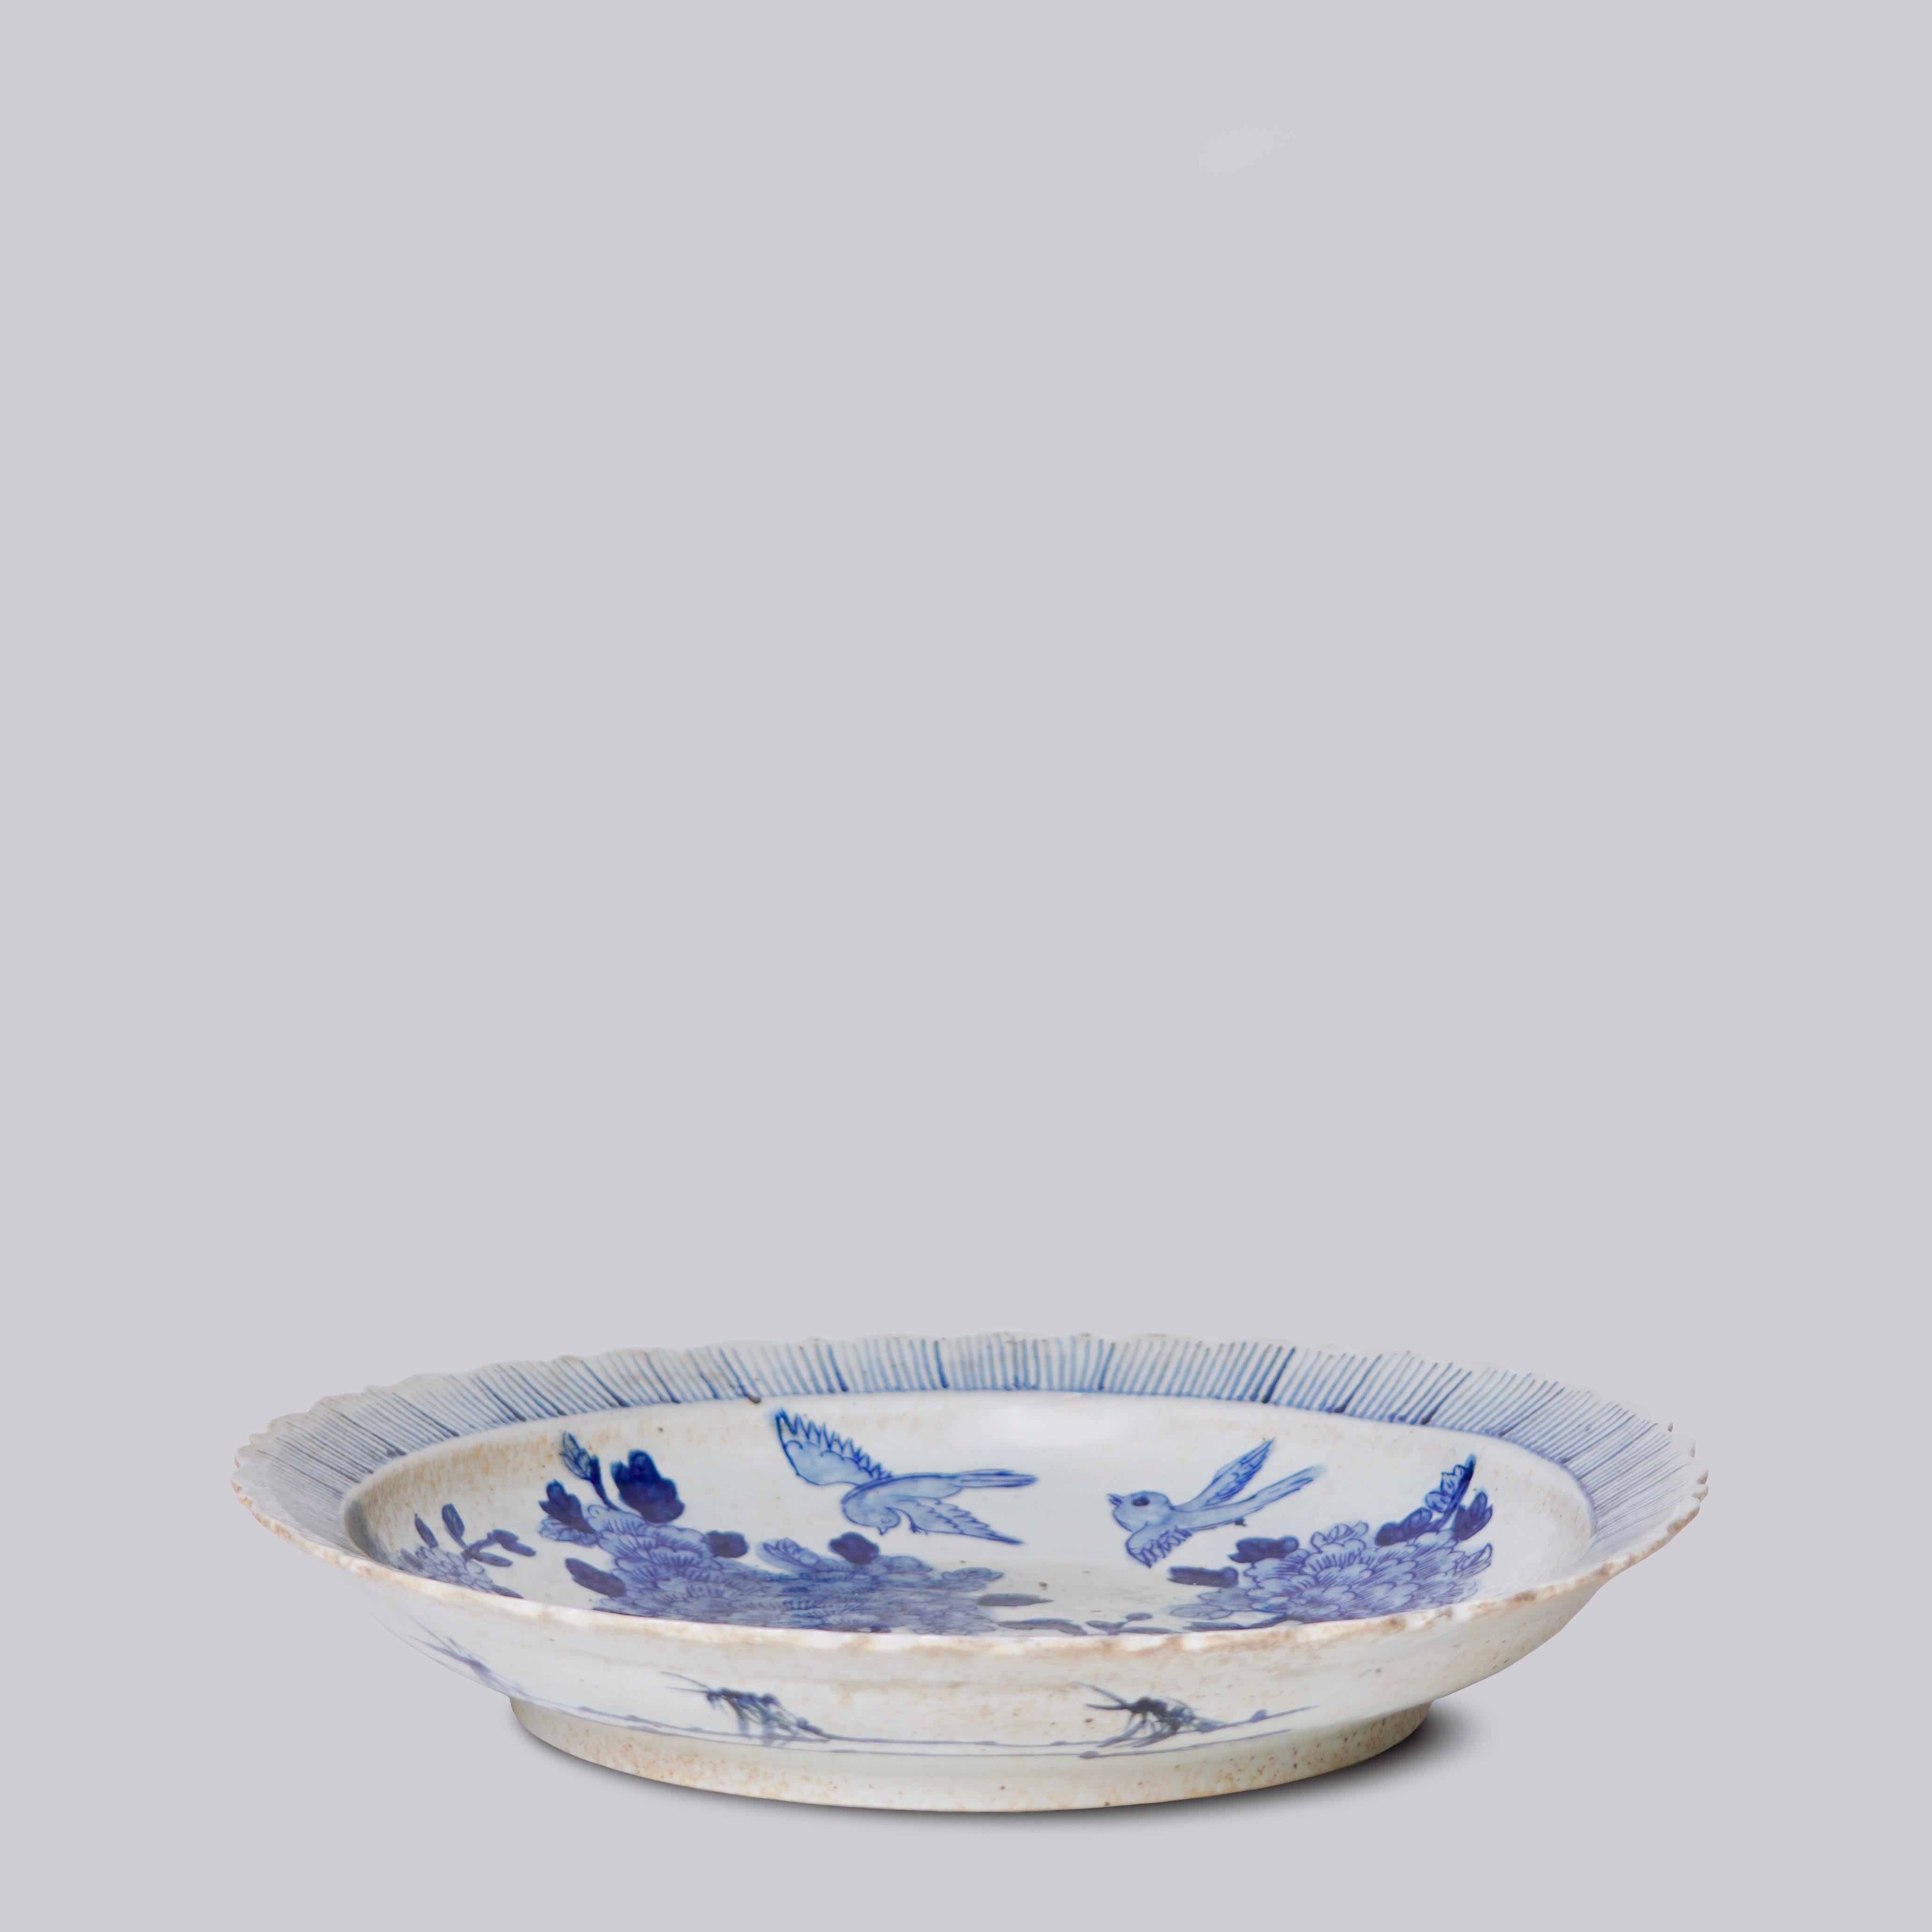 This platter is a traditional rustic style from Jingdezhen, a town long distinguished by imperial patronage. From the loose and lively handpainted design we can deduce that this piece was made for daily use or display in a casual home environment.